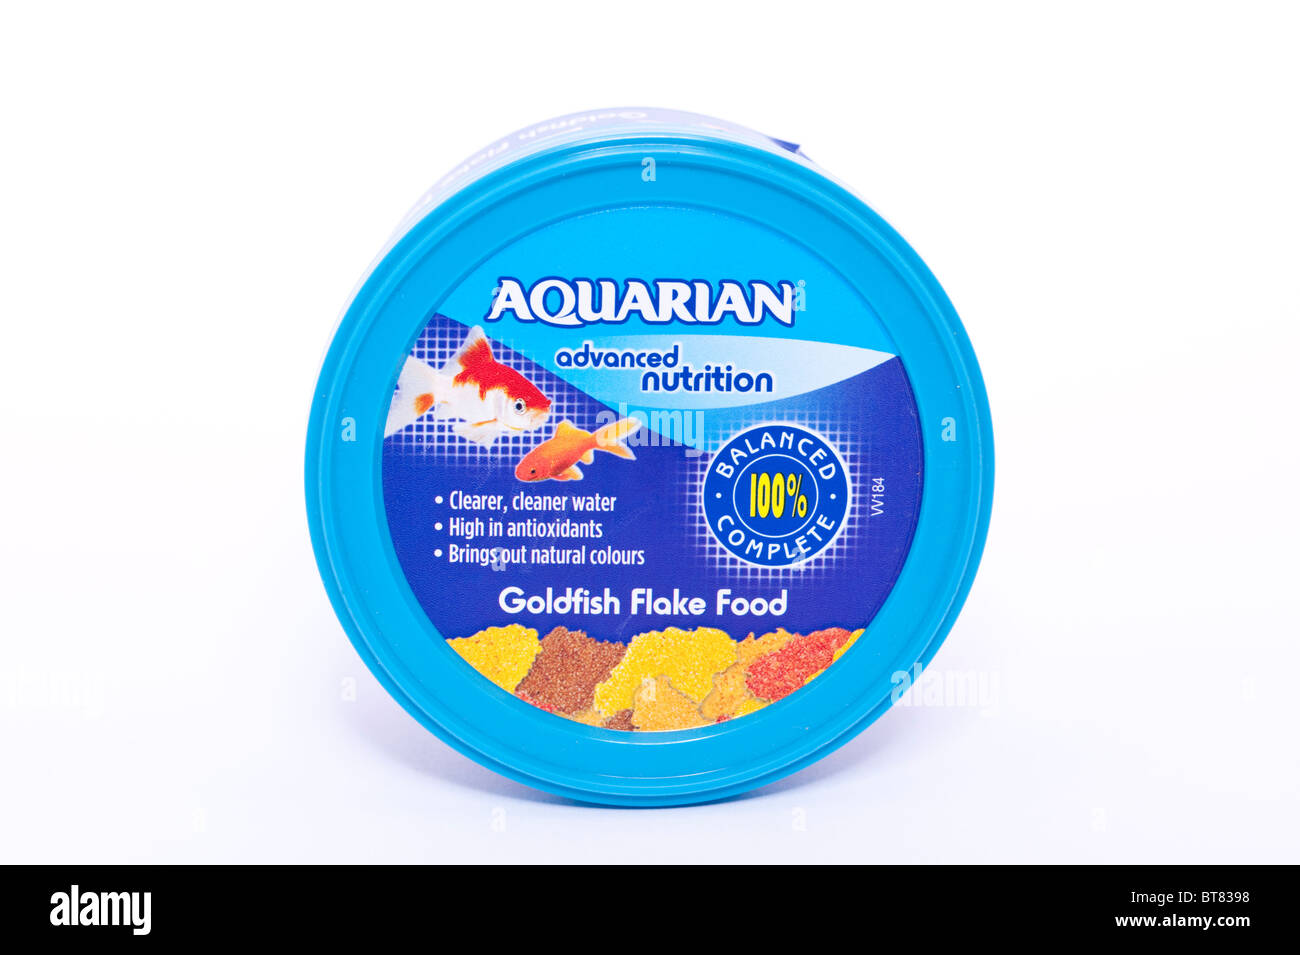 A close up photo of a tub of Aquarian goldfish flake food against a white background Stock Photo